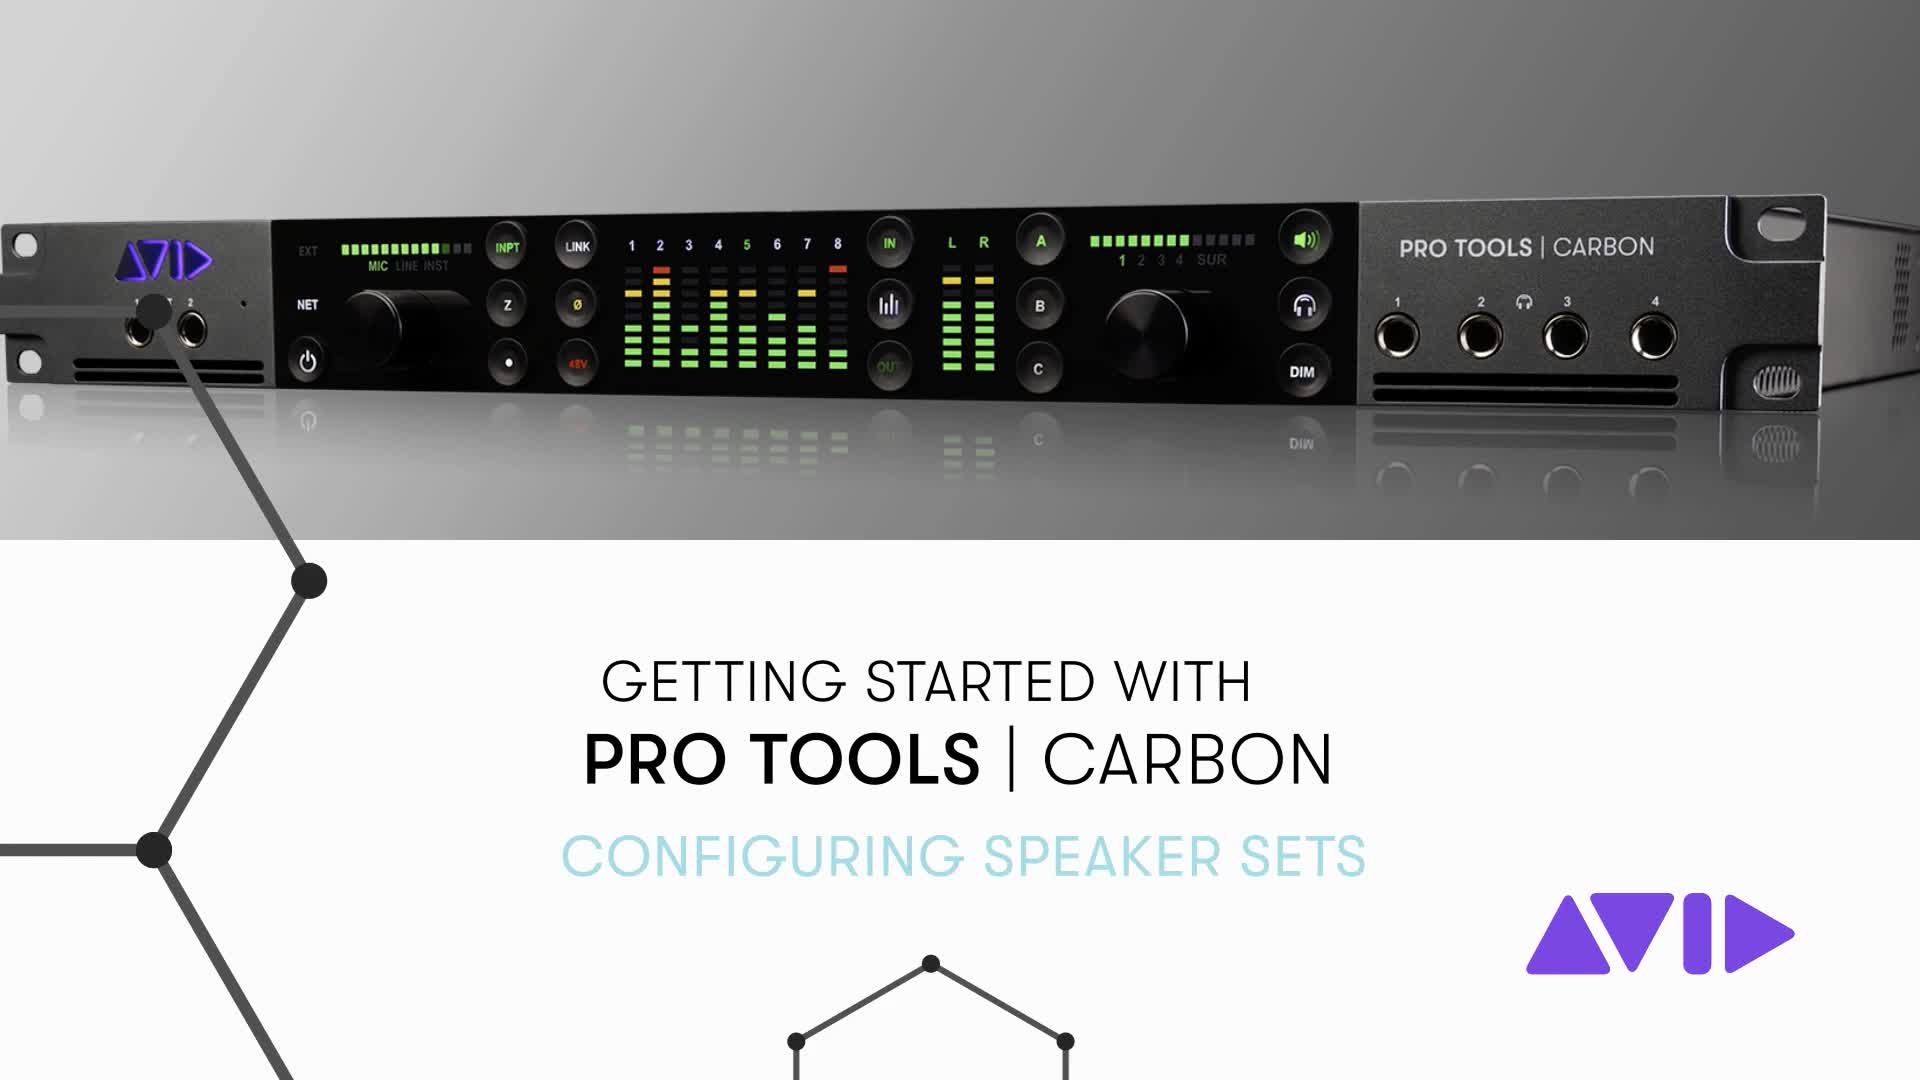 05 Pro Tools Carbon Getting Started - Configuring Speaker Sets